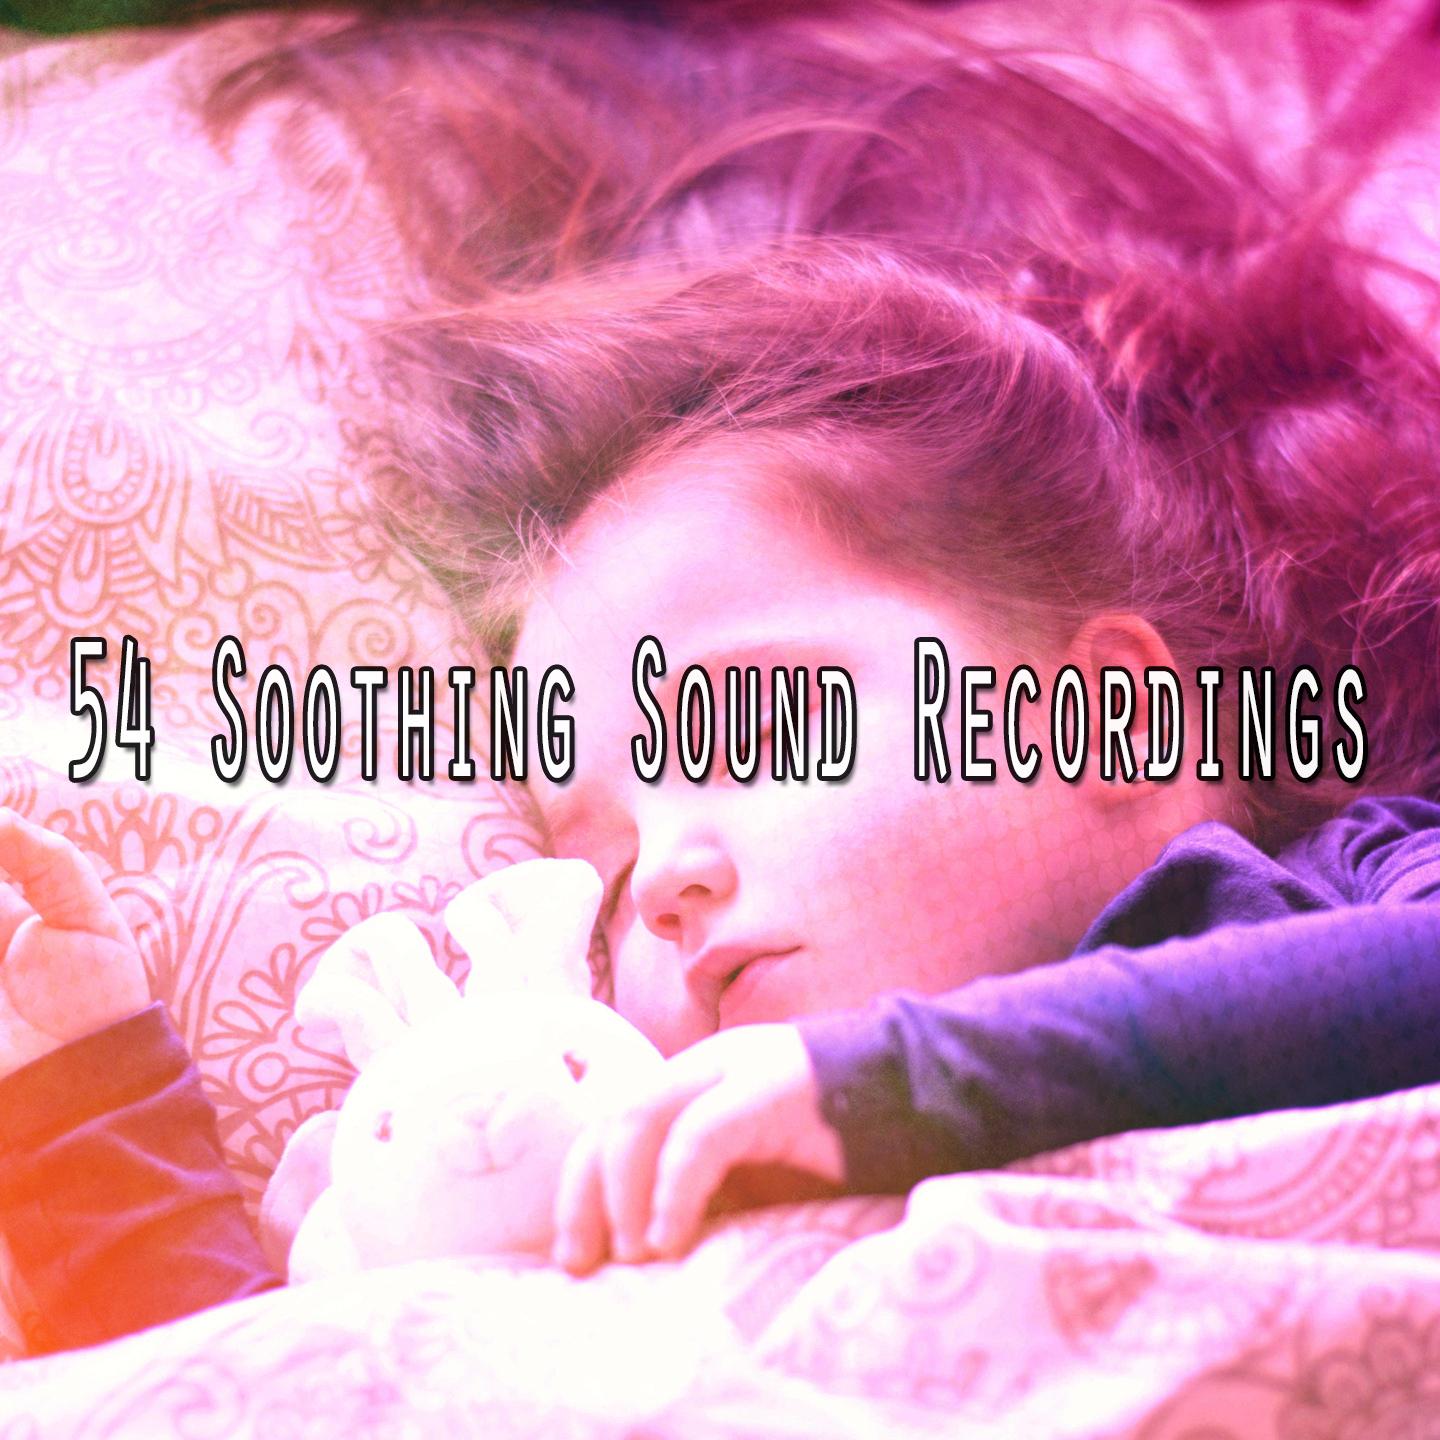 54 Soothing Sound Recordings